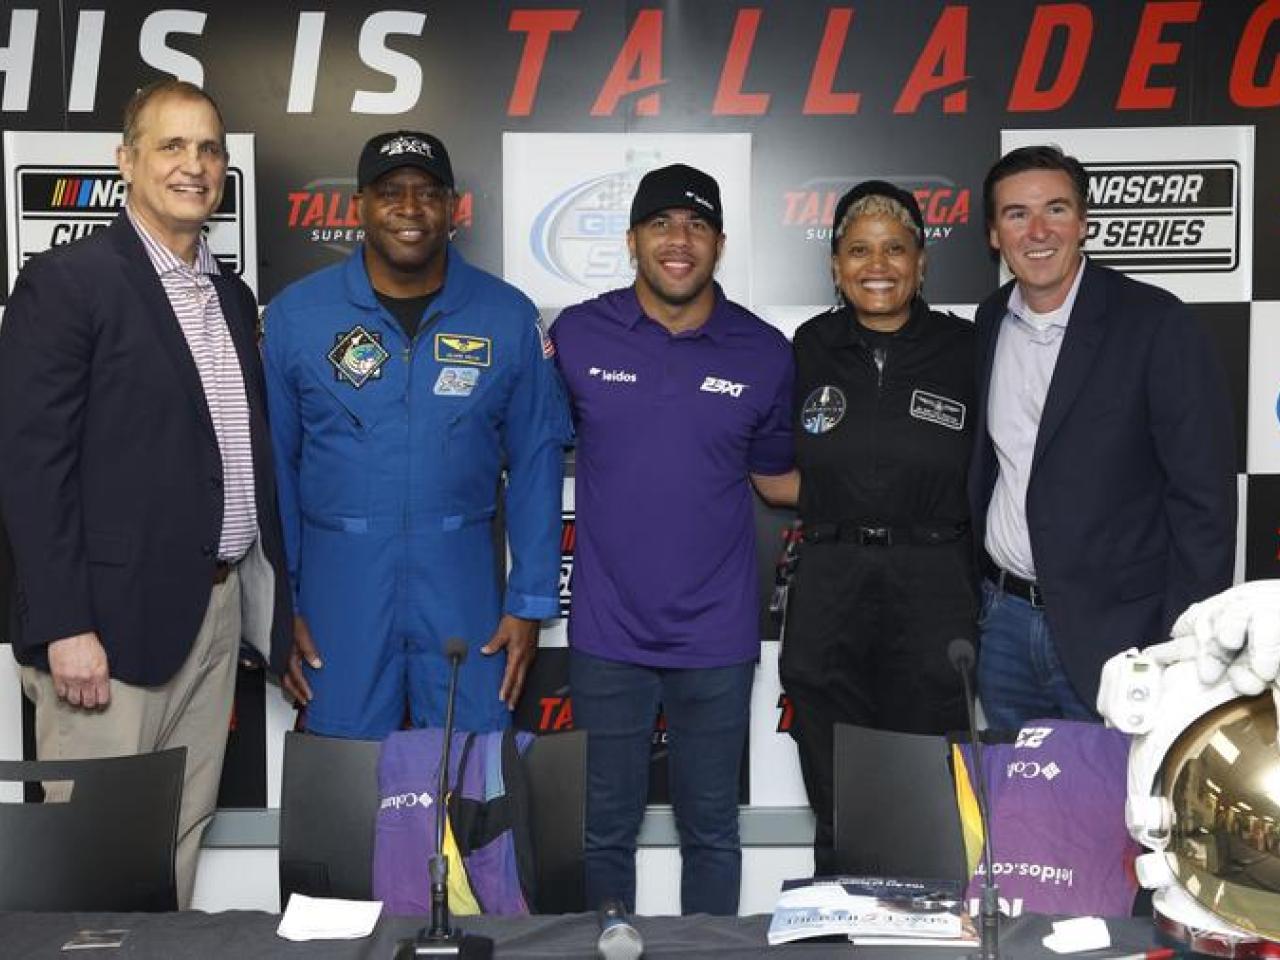 Leidos joins Space4All press conference held at NASCAR’s annual GEICO 500. 